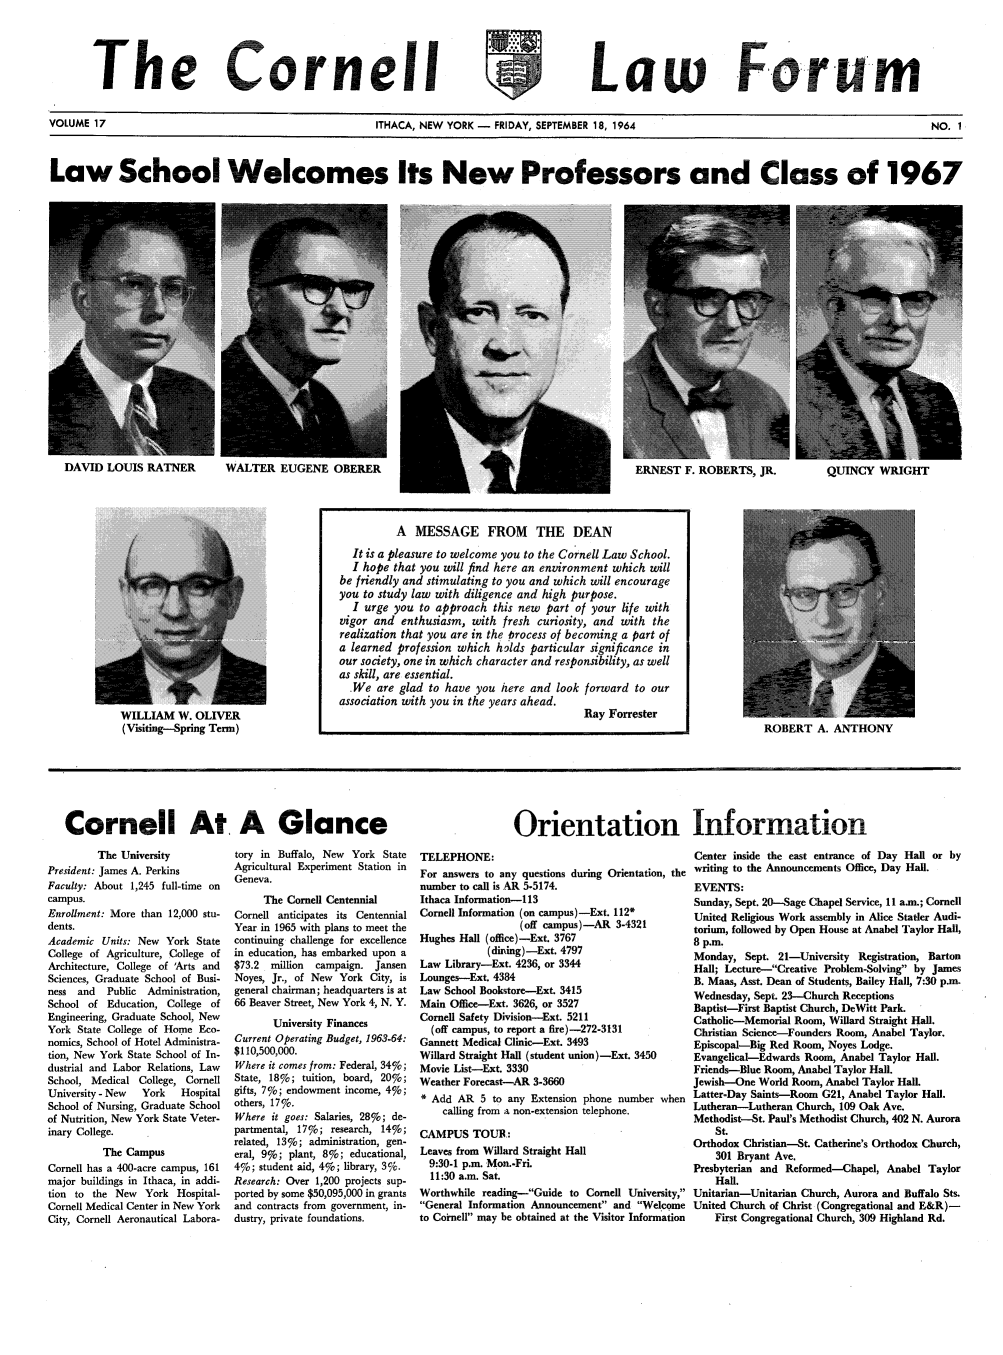 handle is hein.journals/corlawfose17 and id is 1 raw text is: The Cornell-,' ,'~,Law ForumVOLUME 17              ITHACA, NEW YORK -  FRIDAY, SEPTEMBER 18, 1964  NO. 1Law School Welcomes Its New Professors and Class of 1967DAVID LOUIS RATNERWALTER EUGENE OBERERERNEST F. ROBERTS, JR.  QUINCY WRIGHTWILLIAM W. OLIVER(Visiting-Spring Term)ROBERT A. ANTHONYCornell At A GlanceOrientation InformationThe UniversityPresident: James A. PerkinsFaculty: About 1,245 full-time oncampus.Enrollment: More than 12,000 stu-dents.Academic Units: New York StateCollege of Agriculture, College ofArchitecture, College of 'Arts andSciences, Graduate School of Busi-ness and   Public  Administration,School of Education, College ofEngineering, Graduate School, NewYork State College of Home Eco-nomics, School of Hotel Administra-tion, New York State School of In-dustrial and Labor Relations, LawSchool, Medical College, CornellUniversity - New  York   HospitalSchool of Nursing, Graduate Schoolof Nutrition, New York State Veter-inary College.The CampusCornell has a 400-acre campus, 161major buildings in Ithaca, in addi-tion to the New York Hospital-Cornell Medical Center in New YorkCity, Cornell Aeronautical Labora-tory in Buffalo, New York StateAgricultural Experiment Station inGeneva.The Cornell CentennialCornell anticipates its CentennialYear in 1965 with plans to meet thecontinuing challenge for excellencein education, has embarked upon a$73.2  million  campaign. JansenNoyes, Jr., of New York City, isgeneral chairman; headquarters is at66 Beaver Street, New York 4, N. Y.University FinancesCurrent Operating Budget, 1963.64:$110,500,000.Where it comes from: Federal, 34%;State, 18%; tuition, board, 20%;gifts, 7%; endowment income, 4%;others, 17%.Where it goes: Salaries, 28%; de-partmental, 17%; research, 14%;related, 13%; administration, gen-eral, 9%; plant, 8%; educational,4%; student aid, 4%; library, 3%.Research: Over 1,200 projects sup-ported by some $50,095,000 in grantsand contracts from government, in-dustry, private foundations.TELEPHONE:For answers to any questions during Orientation, thenumber to call is AR 5.5174.Ithaca Information-1 13Cornell Information (on campus)-Ext. 112*(off campus)-AR 3-4321Hughes Hall (office)-Ext. 3767(dining) -Ext. 4797Law Library-Ext. 4236, or 3344Lounges-Ext. 4384Law School Bookstore-Ext. 3415Main Office-Ext. 3626, or 3527Cornell Safety Division-Ext. 5211(off campus, to report a fire)-272-3131Gannett Medical Clinic-Ext. 3493Willard Straight Hall (student union)-Ext. 3450Movie List-Ext. 3330Weather Forecast-AR 3-3660* Add AR 5 to any Extension phone number whencalling from a non-extension telephone.CAMPUS TOUR:Leaves from Willard Straight Hall9:30-1 p.m. Mon.-Fri.11:30 a.m. Sat.Worthwhile reading-Guide to Cornell University,General Information Announcement and Welcometo Coinell may be obtained at the Visitor InformationCenter inside the east entrance of Day Hall or bywriting to the Announcements Office, Day Hall.EVENTS:Sunday, Sept. 20-Sage Chapel Service, 11 ann.; CornellUnited Religious Work assembly in Alice Statler Audi-torium, followed by Open House at Anabel Taylor Hall,8 p.m.Monday, Sept. 21-University Registration, BartonHall; Lecture--Creative Problem-Solving by JamesB. Maas, Asst. Dean of Students, Bailey Hall, 7:30 p.m.Wednesday, Sept. 23-Church ReceptionsBaptist-First Baptist Church, DeWitt Park.Catholic-Memorial Room, Willard Straight Hall.Christian Science-Founders Room, Anabel Taylor.Episcopal-Big Red Room, Noyes Lodge.Evangelical-Edwards Room, Anabel Taylor Hall.Friends-Blue Room, Anabel Taylor Hall.Jewish-One World Room, Anabel Taylor Hall.Latter-Day Saints-Room G21, Anabel Taylor Hall.Lutheran-Lutheran Church, 109 Oak Ave.Methodist--St. Paul's Methodist Church, 402 N. AuroraSt.Orthodox Christian-St. Catherine's Orthodox Church,301 Bryant Ave.Presbyterian and Reformed-Chapel, Anabel TaylorHall.Unitarian-Unitarian Church, Aurora and Buffalo Sts.United Church of Christ (Congregational and E&R)-First Congregational Church, 309 Highland Rd.A MESSAGE FROM THE DEANIt is a pleasure to welcome you to the Cornell Law School.I hope that you will find here an environment which willbe friendly and stimulating to you and which will encourageyou to study law with diligence and high purpose.I urge you to approach this new part of your life withvigor and enthusiasm, with fresh curiosity, and with therealization that you are in the process of becoming a part ofa learned profession which holds particular significance inour society, one in which character and responsibility, as wellas skill, are essential.We are glad to have you here and look forward to ourassociation with you in the years ahead.Ray Forrester